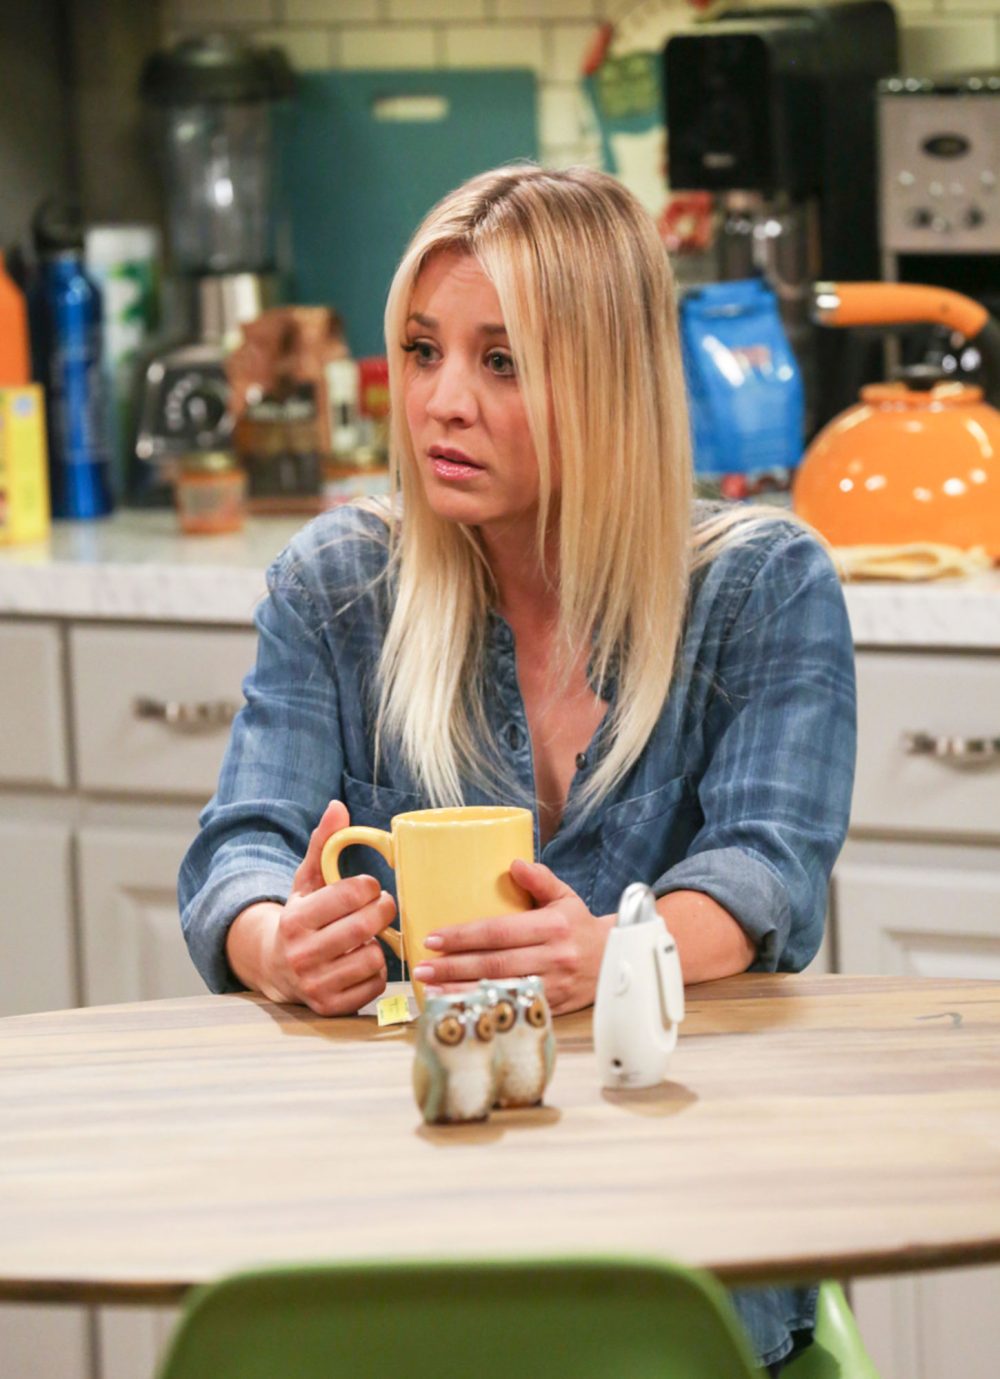 Kaley Cuoco Admits She Gets ‘Waves of Depression’ Over ‘The Big Bang Theory’ Ending